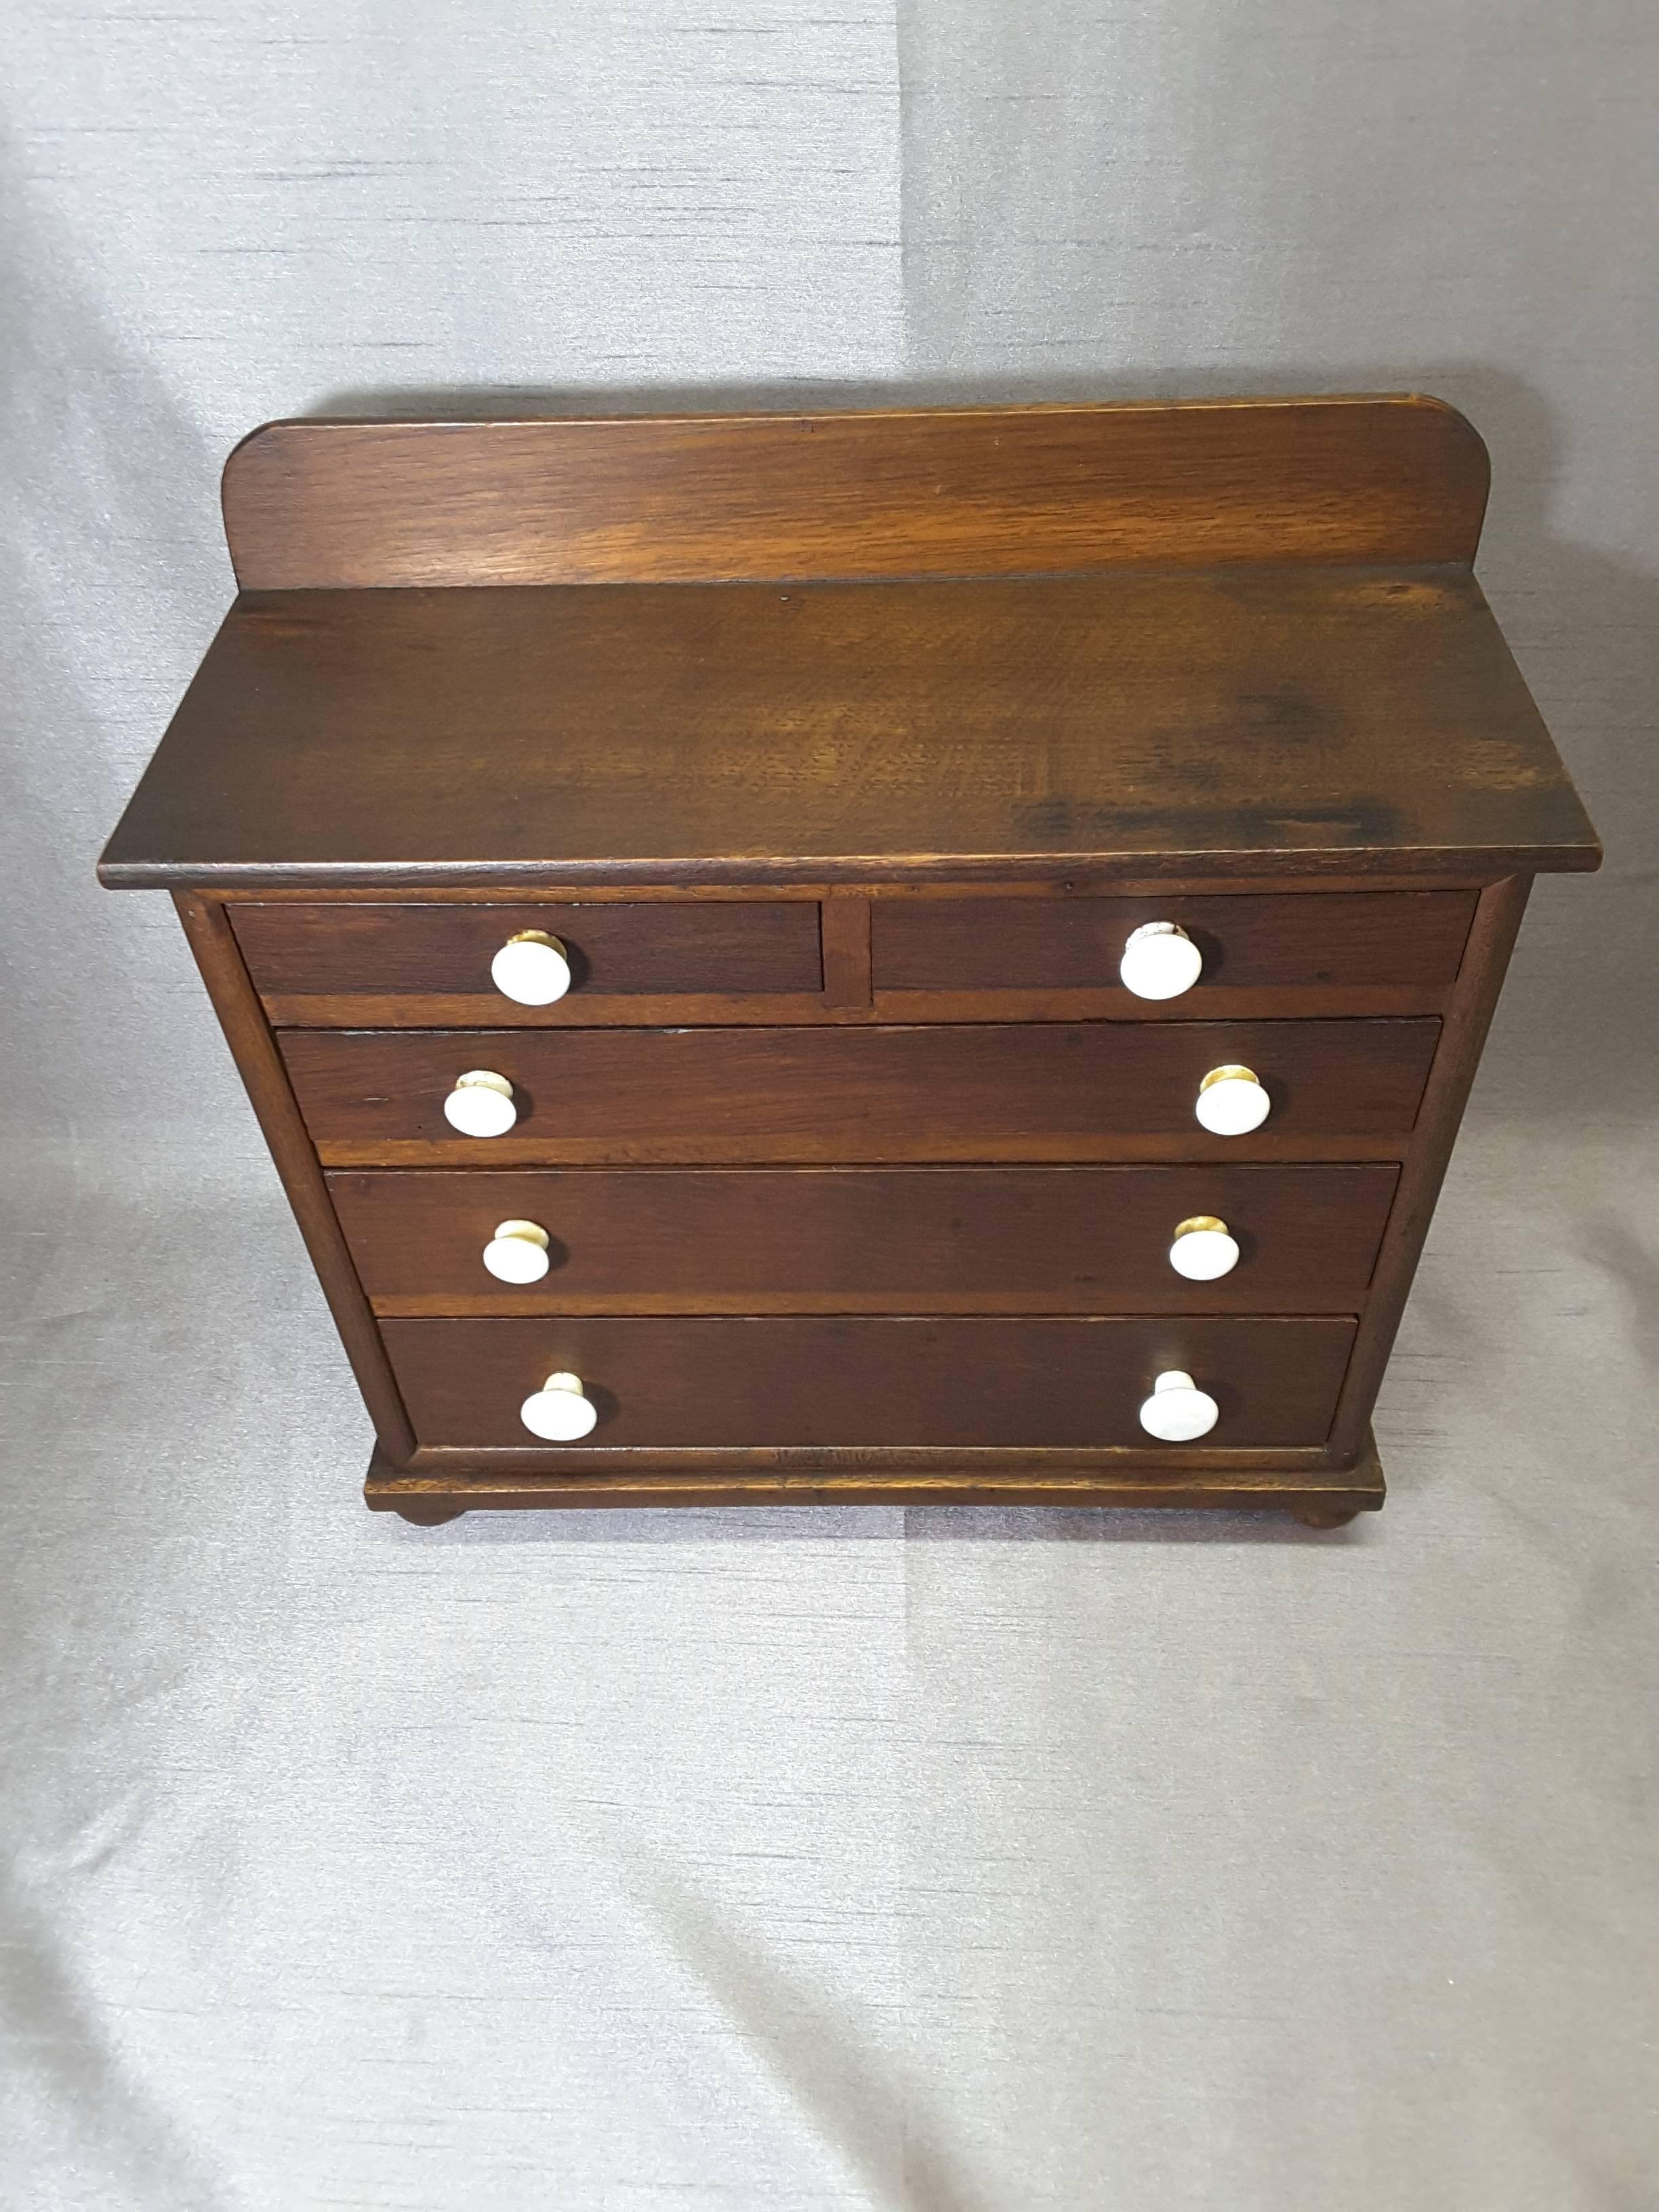 Miniature oak bonnet chest, five drawers, circa 1900, possibly a salesman's sample or children's toy. The case is done in oak with pine interior drawers and porcelain knobs. There is a small upper backboard, the case has four ball feet. The bonnet